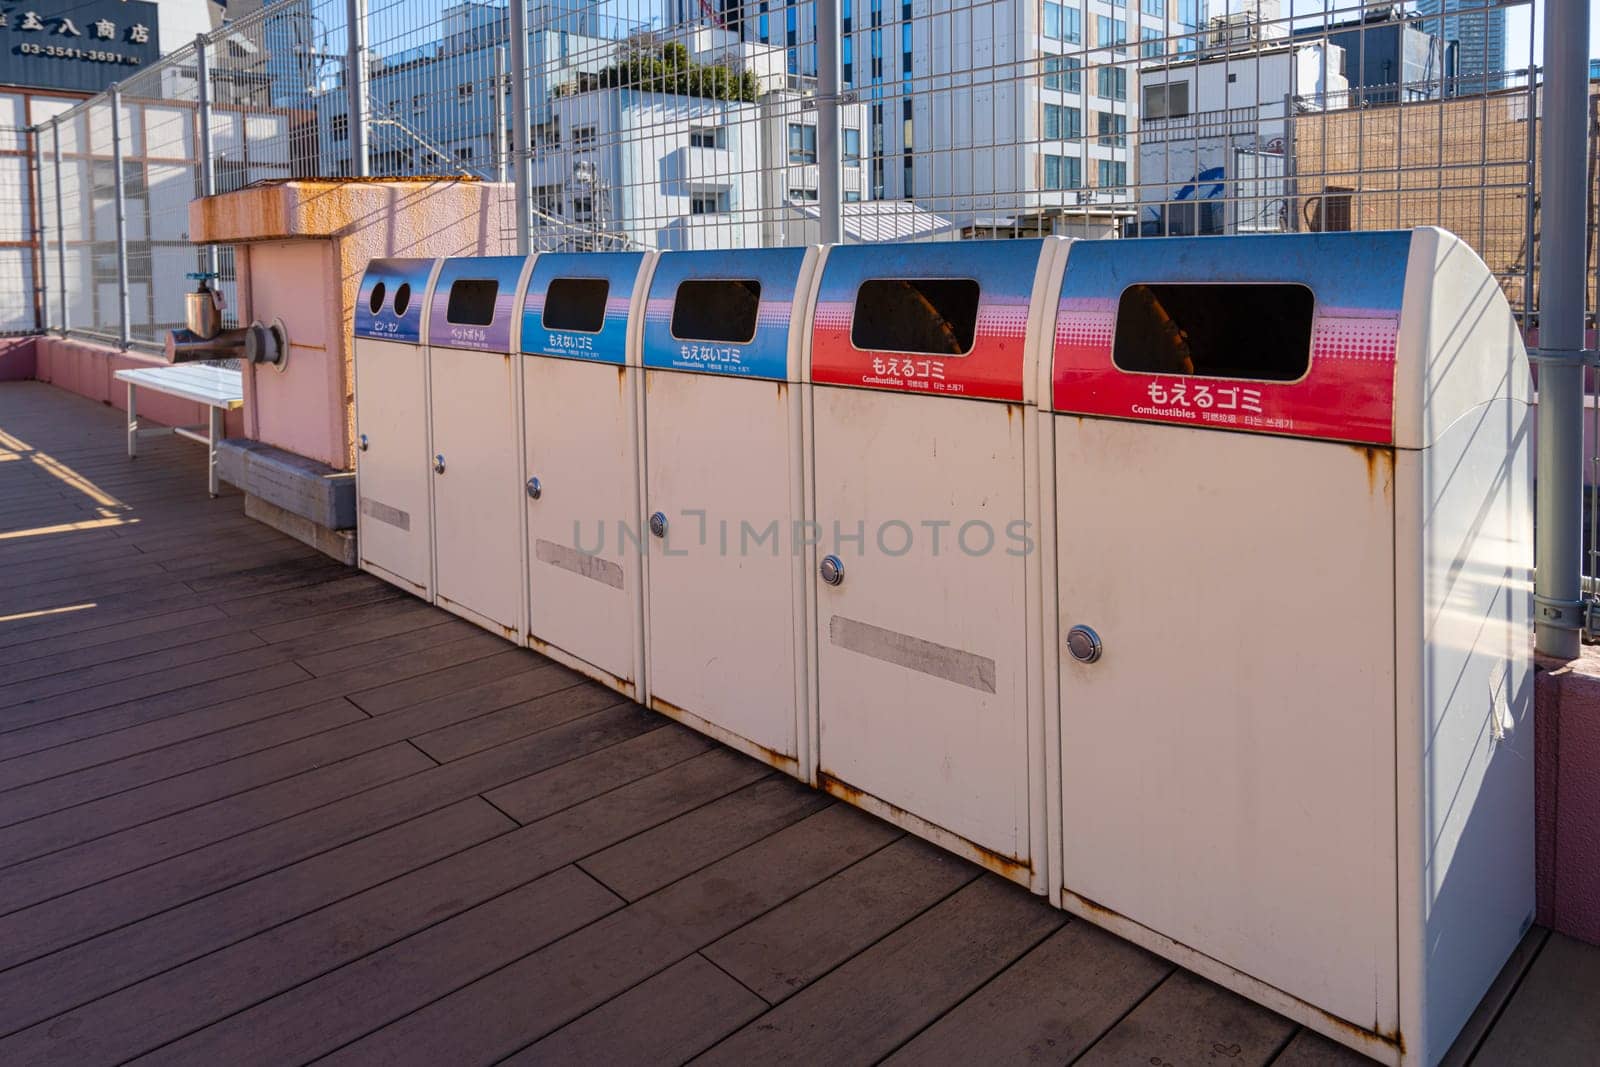 bins for separate waste collection in Tokyo, Japan by sergiodv